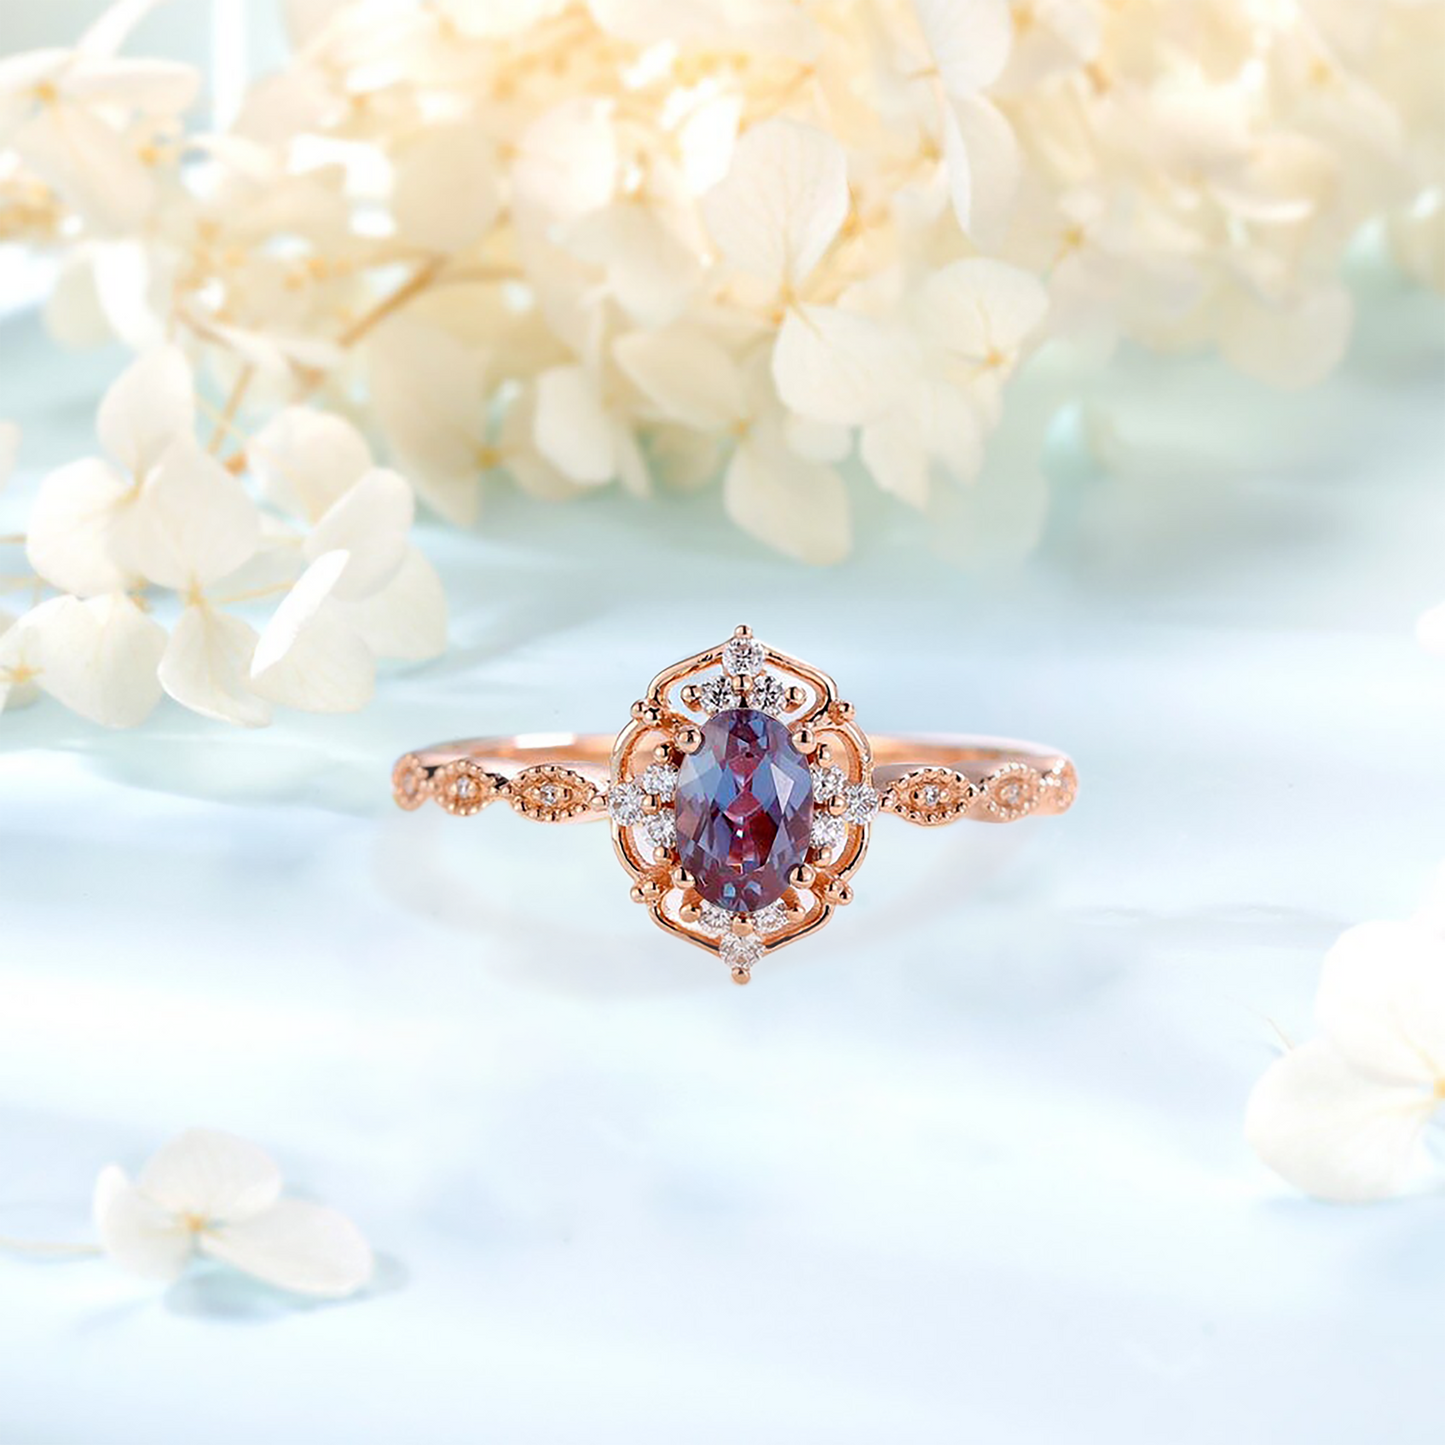 Zircon ring with an alexandrite stone with an orchid on a background